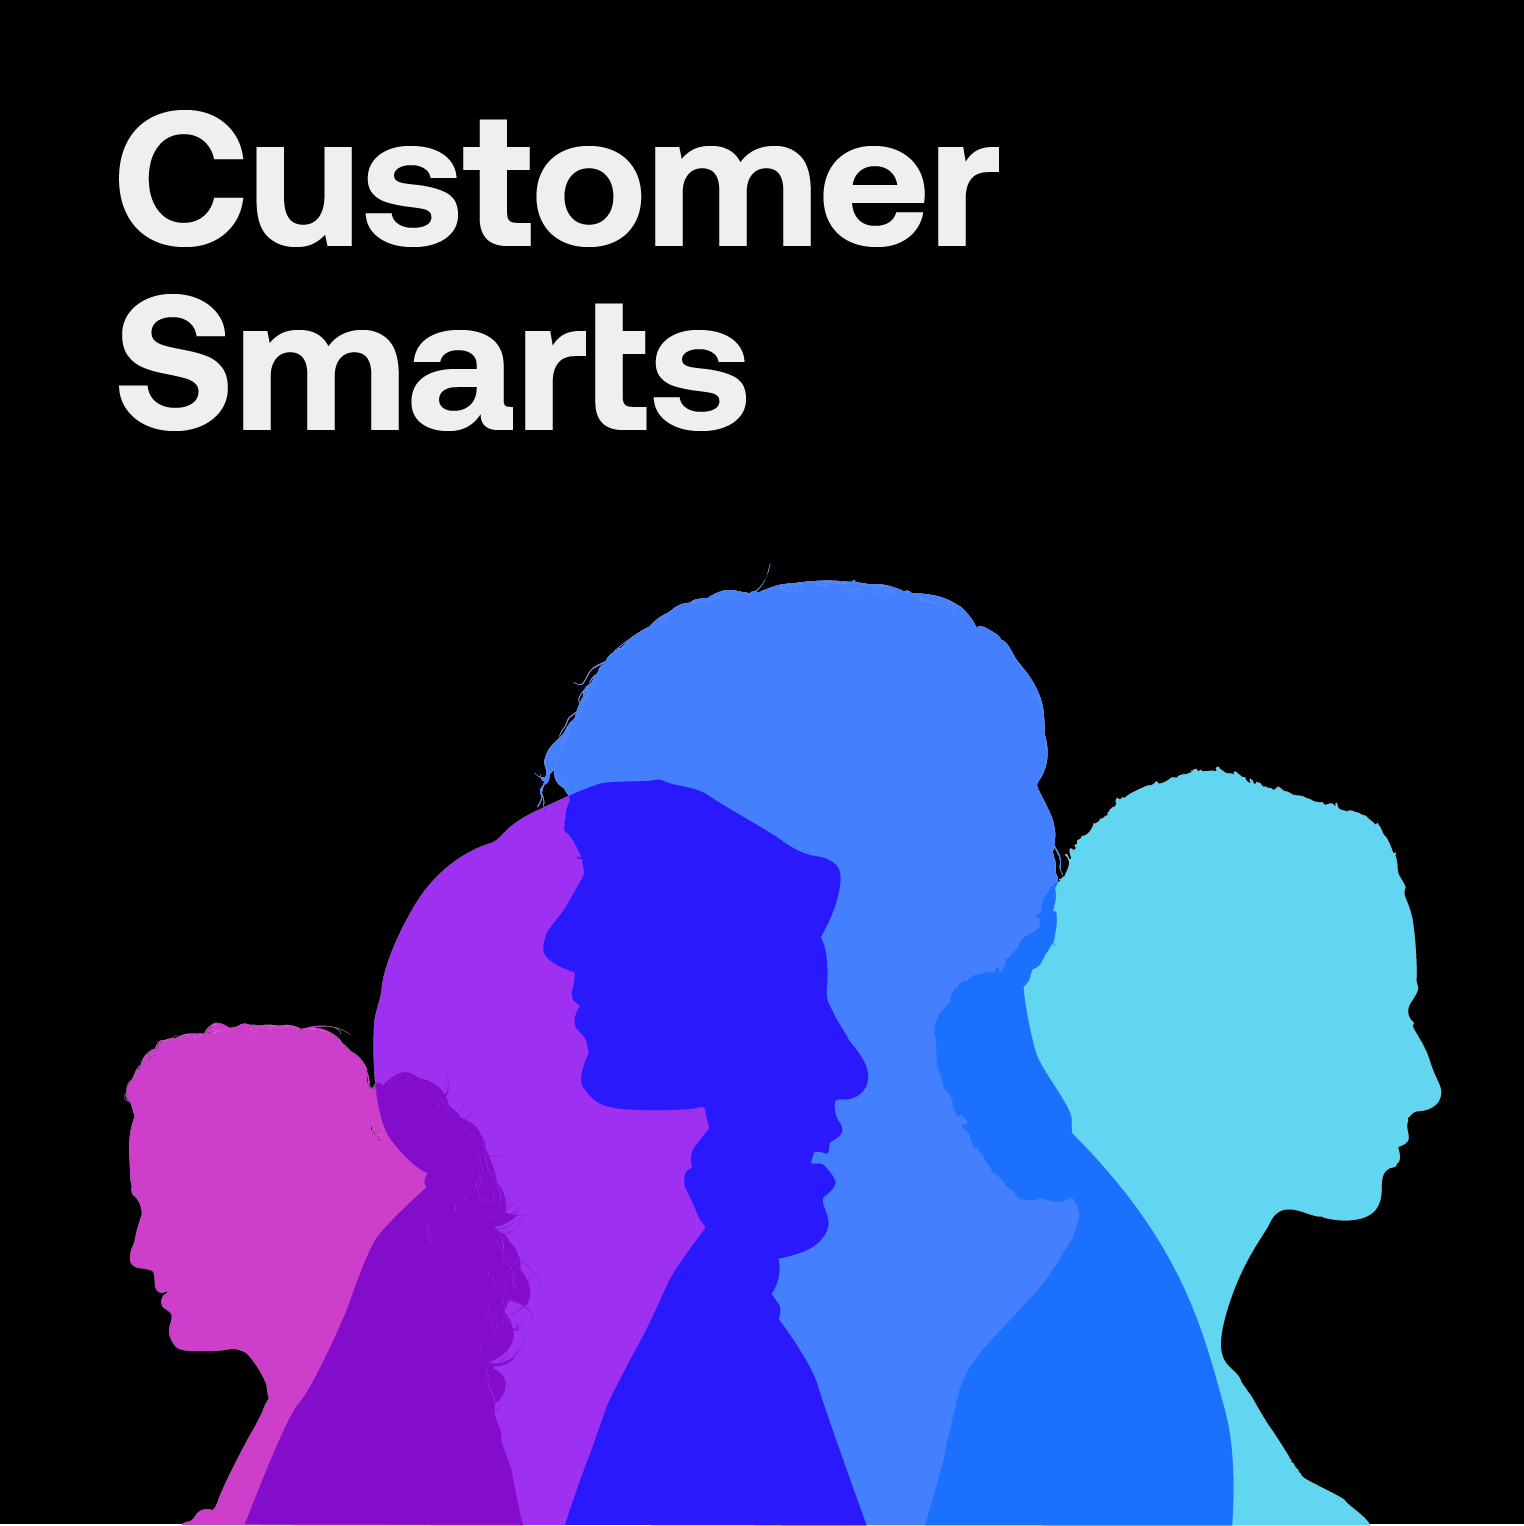 Smarter ways to drive customer growth - with Gareth Begent ex Adobe and Foxtel